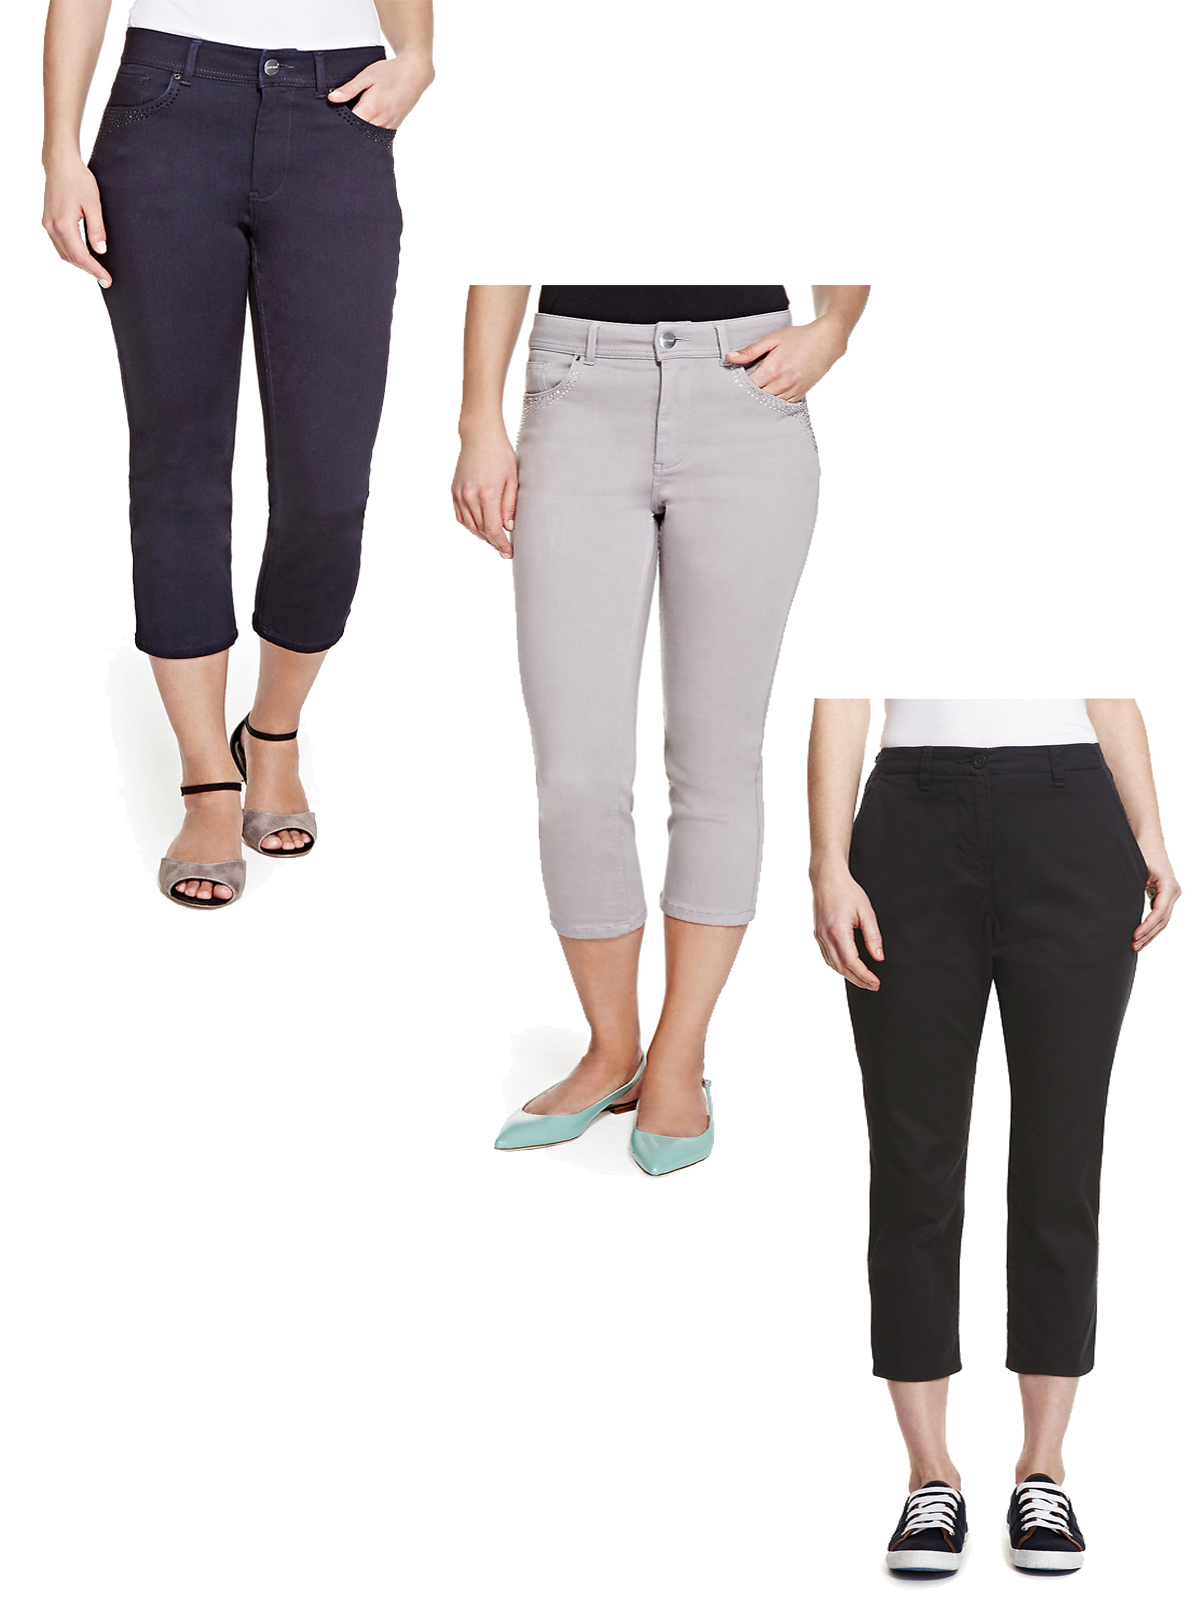 Marks and Spencer - - M&5 ASSORTED Cropped Trousers - Size 8 to 20